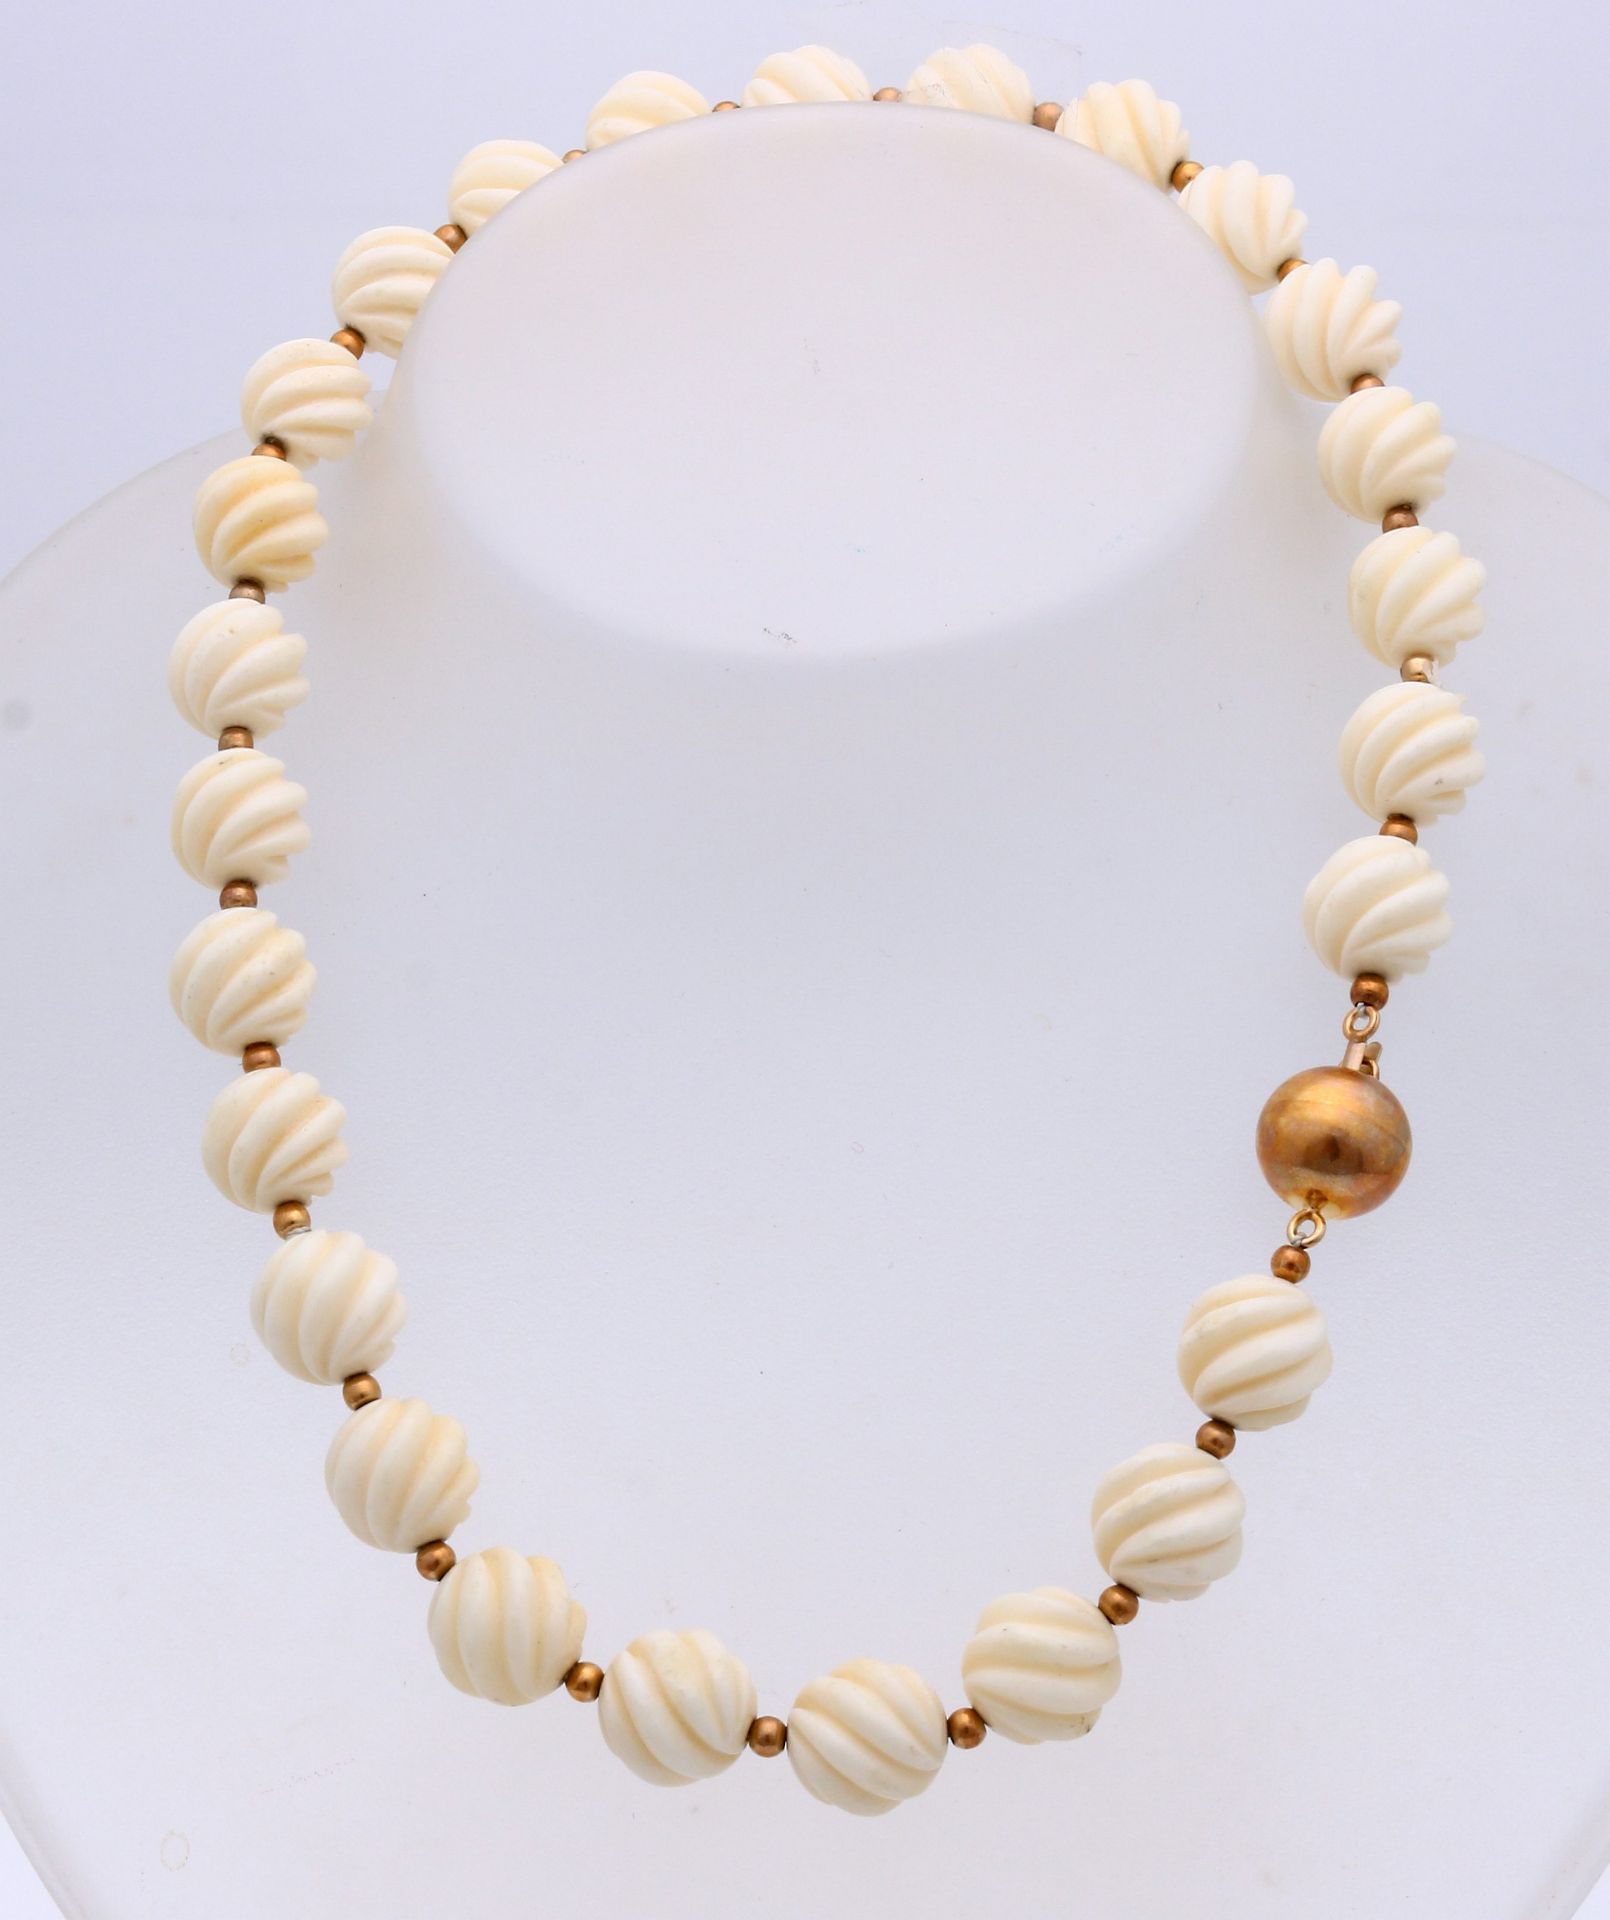 Bone necklace with gold